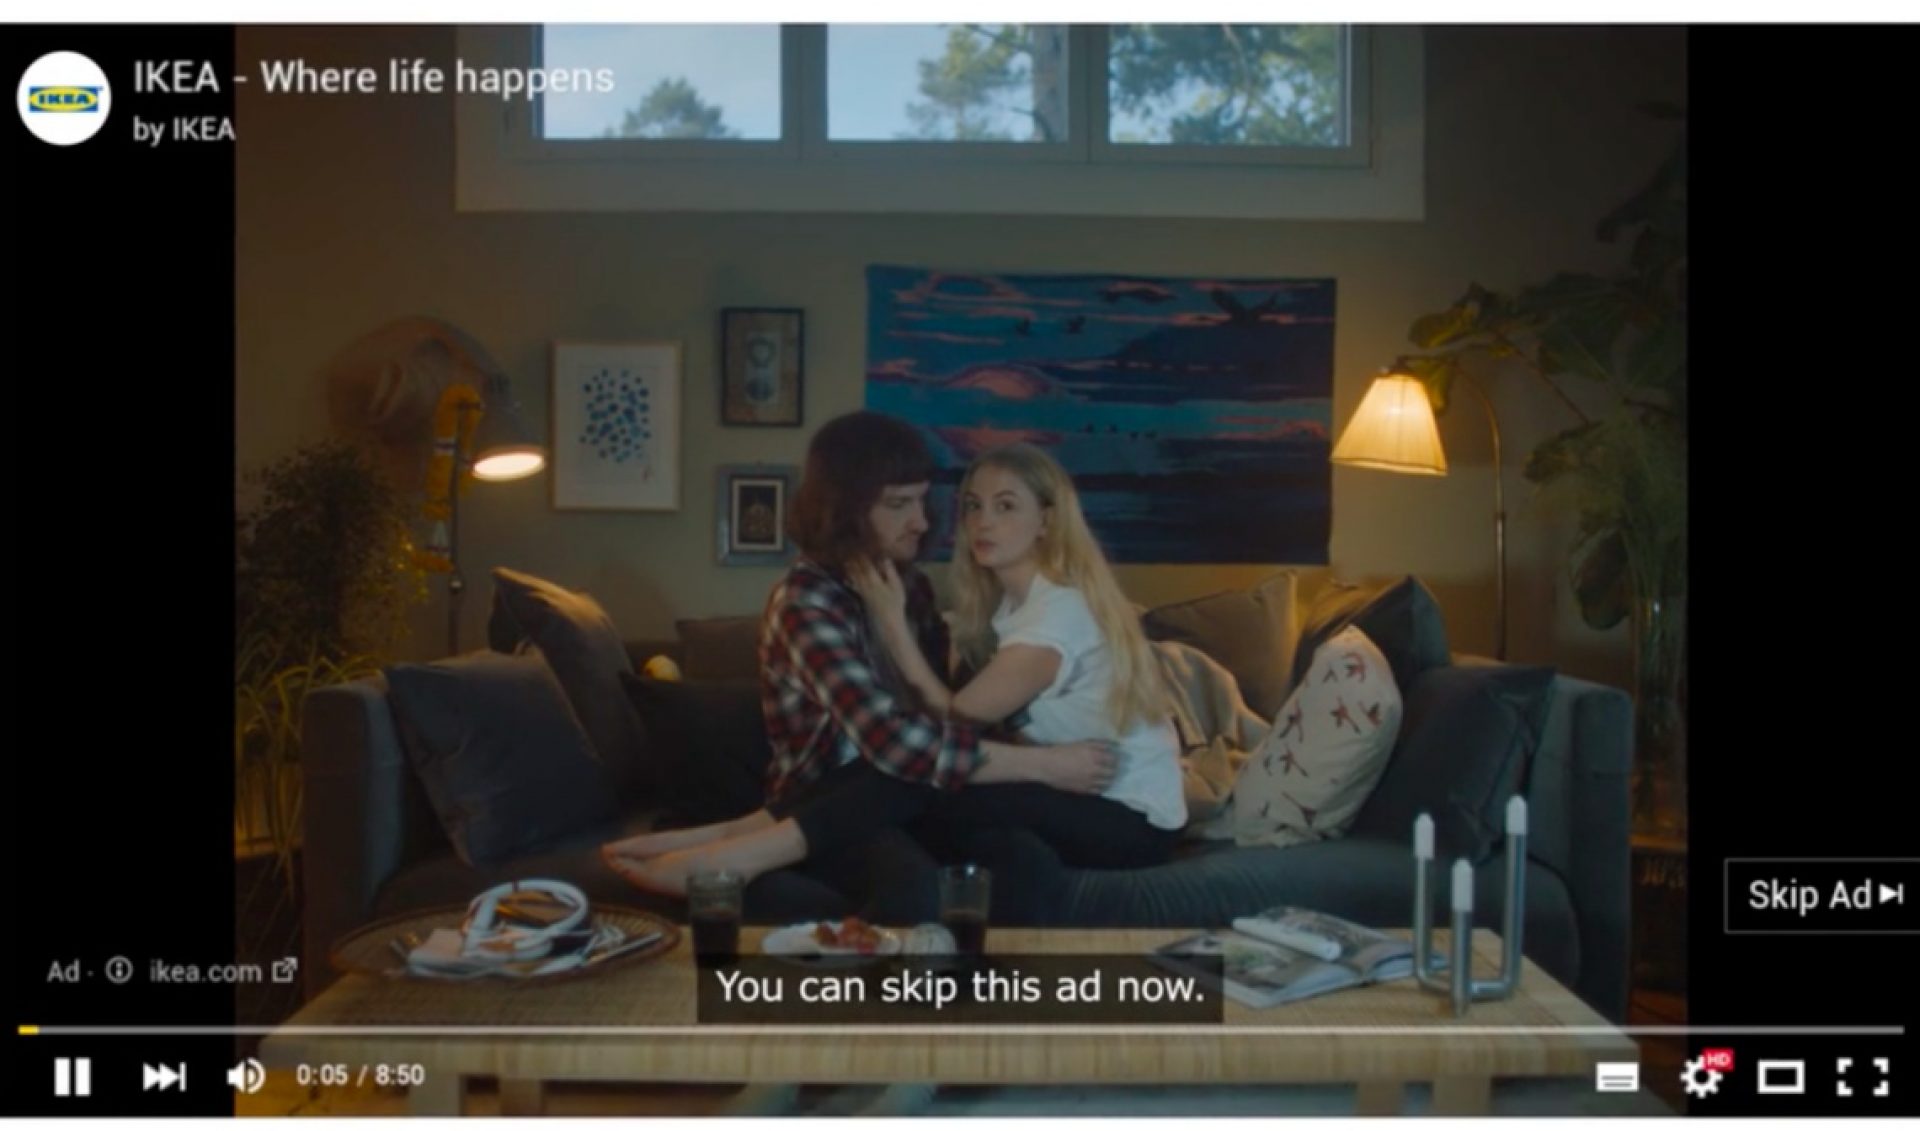 Ikeas Ingenious Pre-Roll Ads Turn The